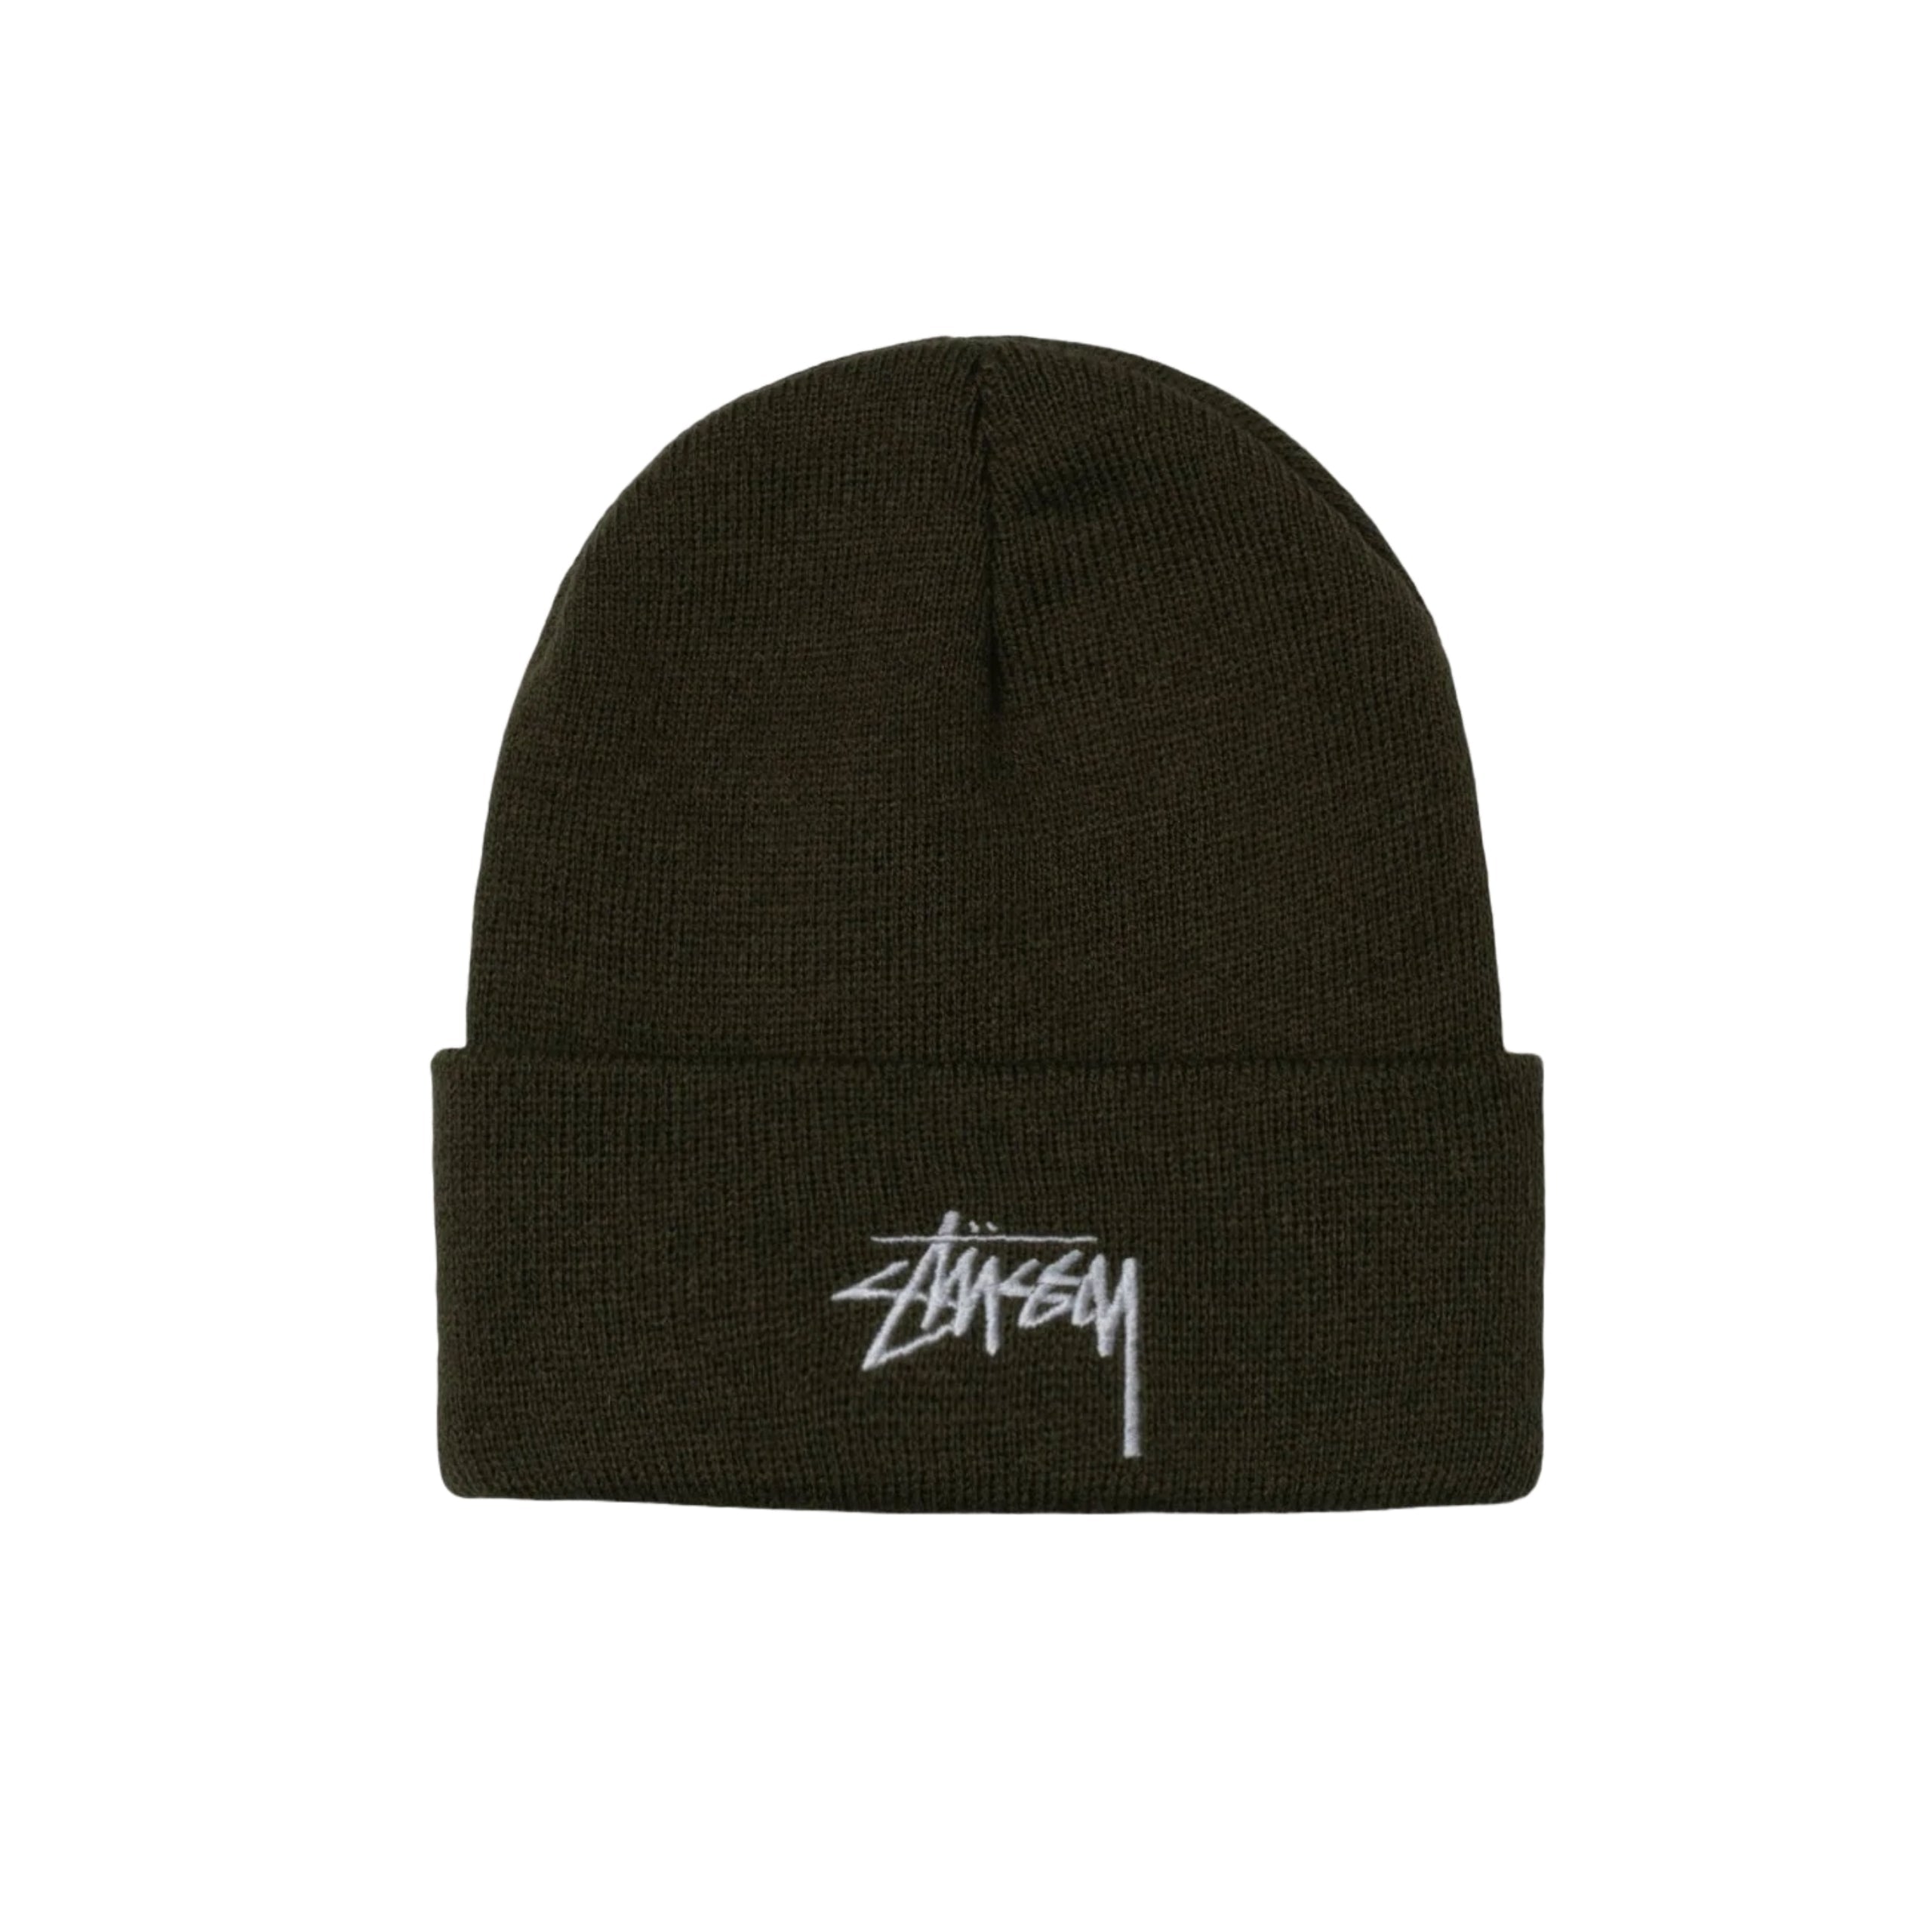 Stussy Stock Cuff Beanie - Olive exclusive at Remix